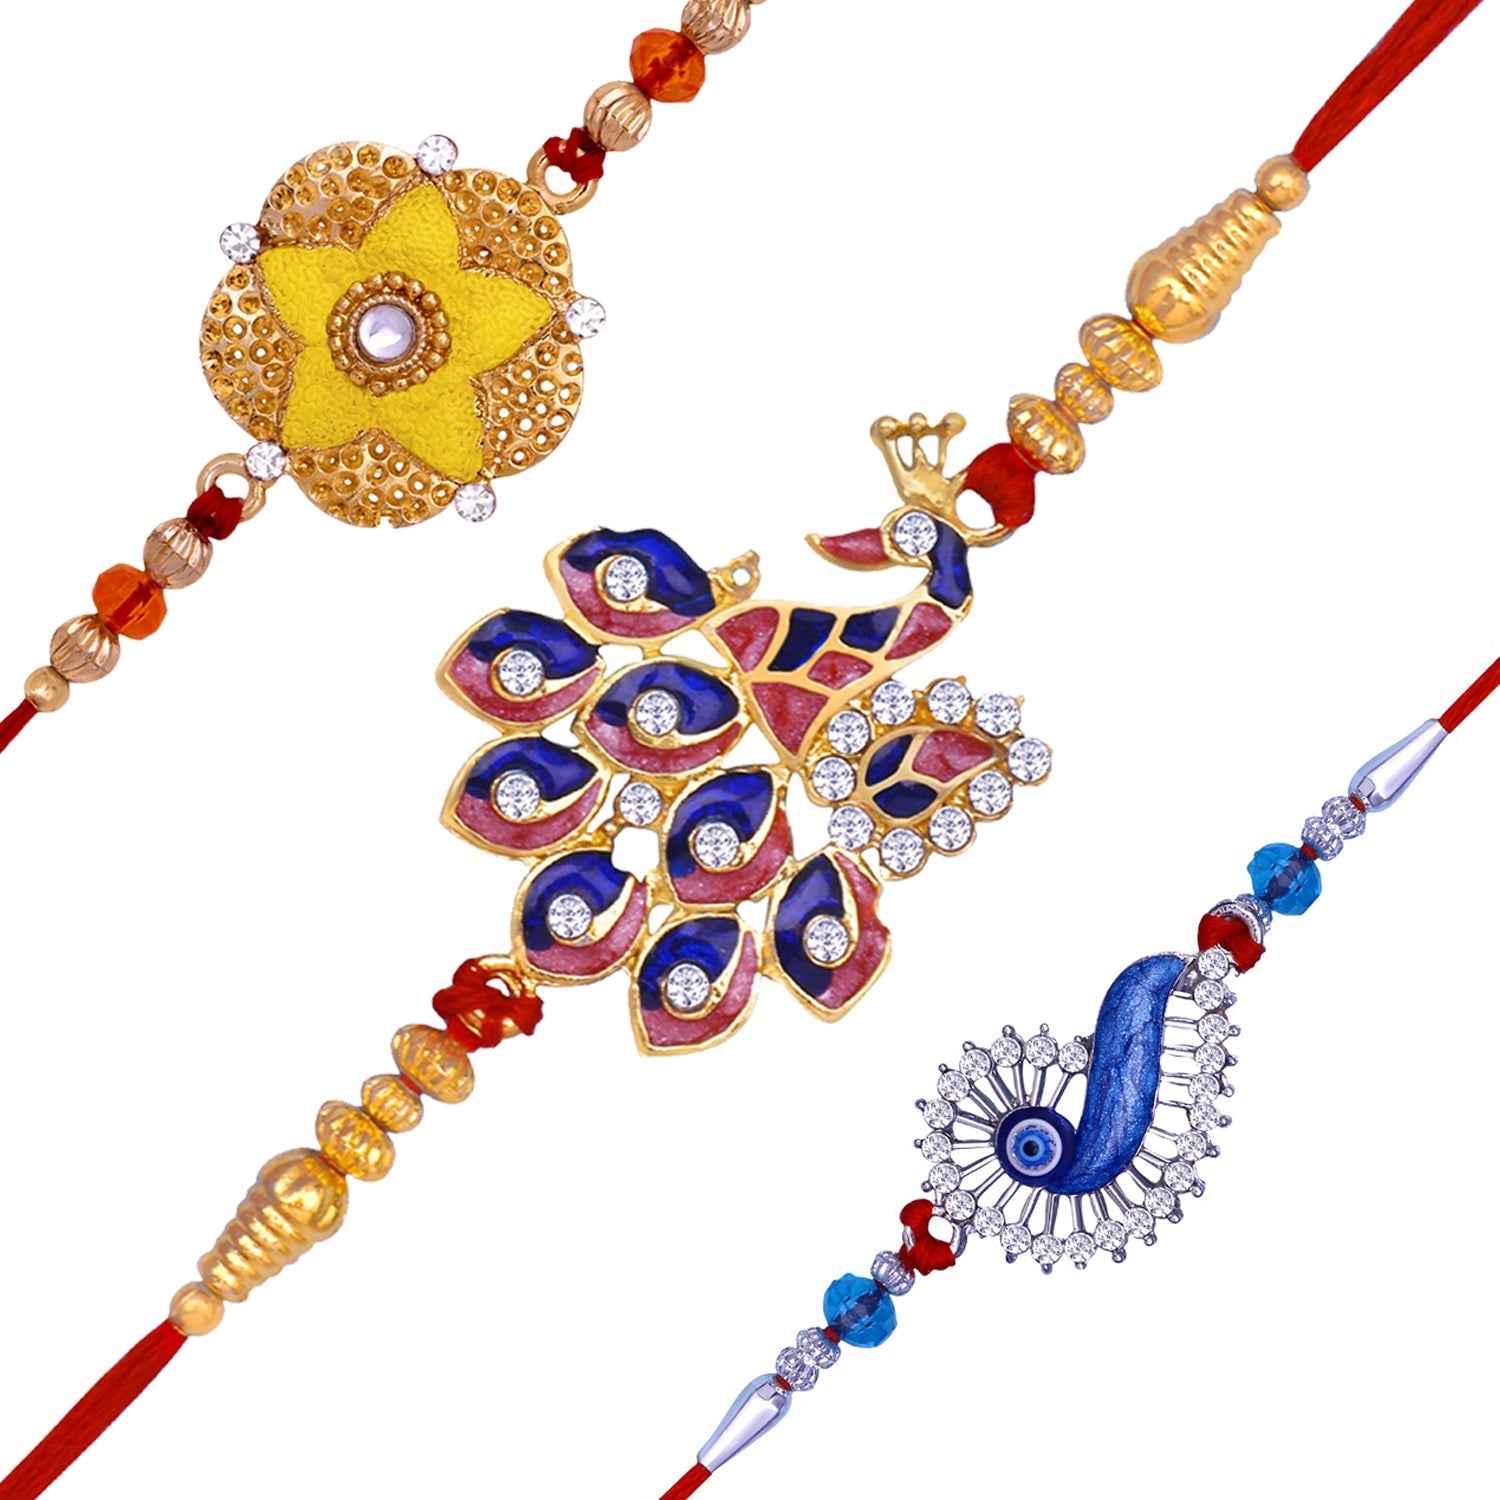 Mahi Combo of Floral, Evil Eye and Peacock Shaped Rakhi's with Meenakari Work and Crystals for Brother's (RCO1105535M)